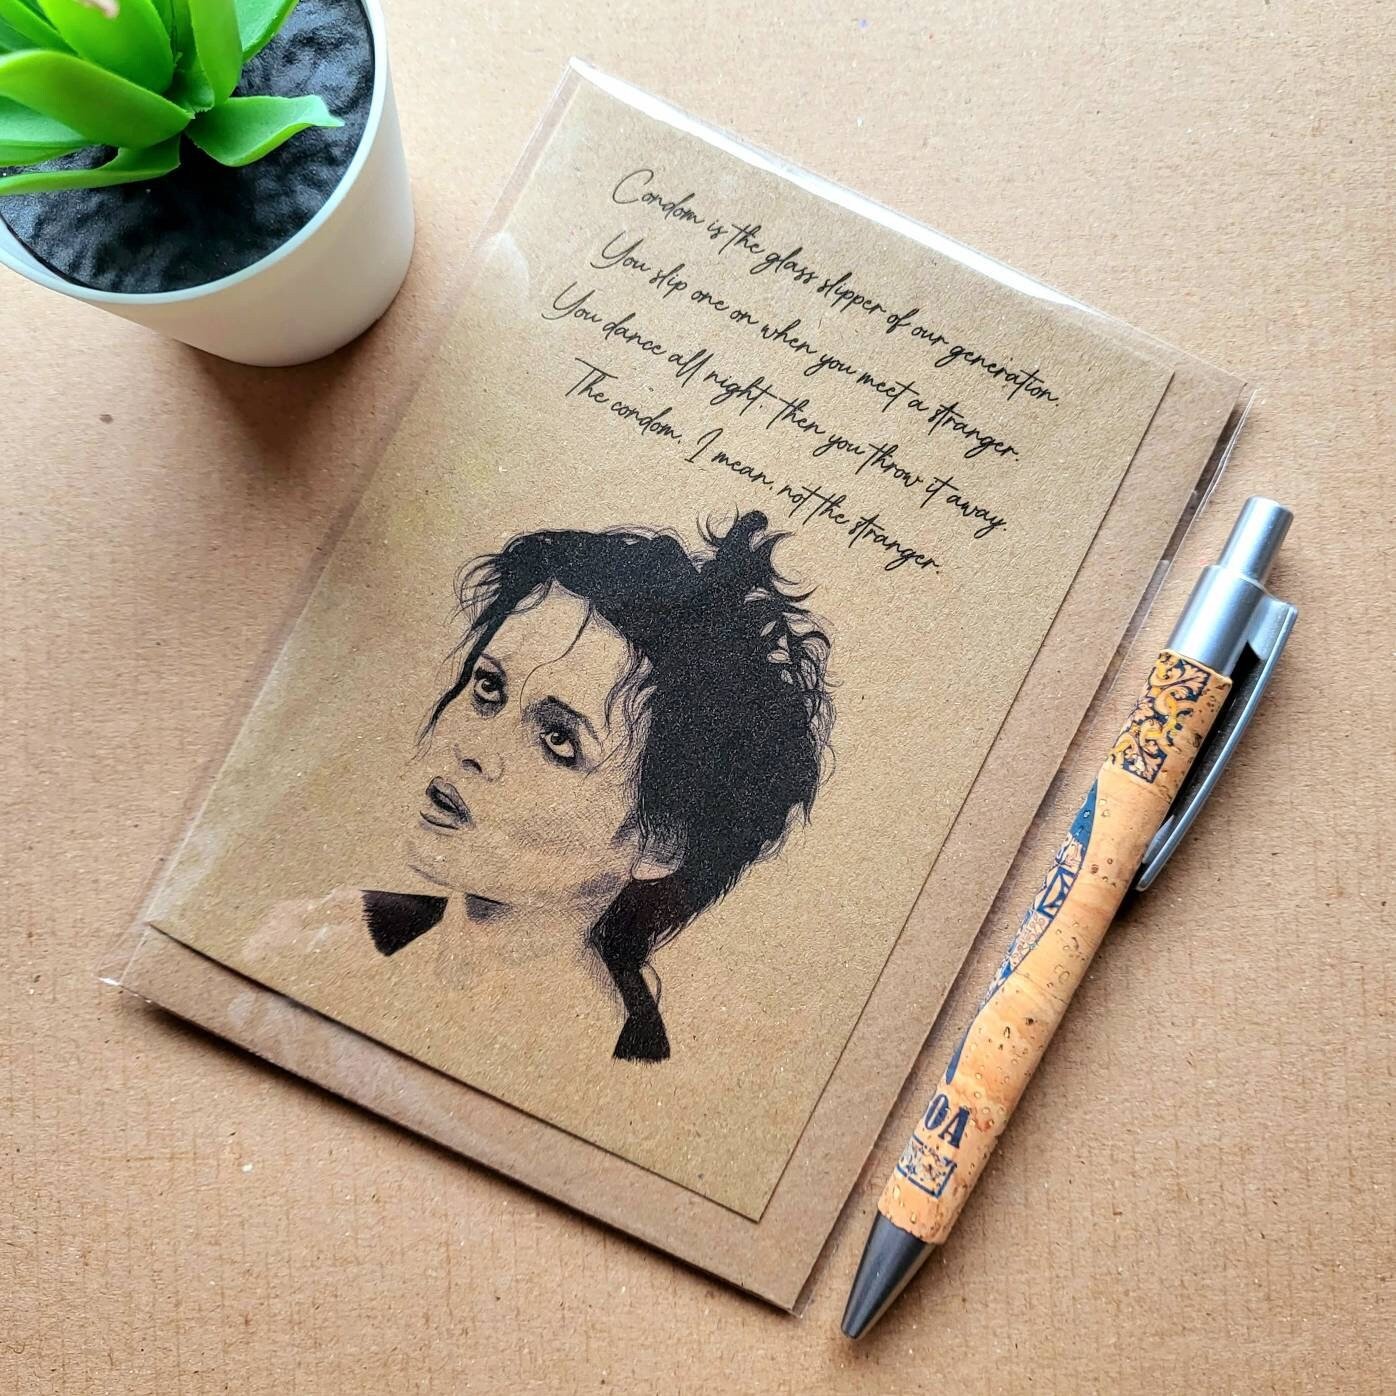 Fight Club quote Card with Marla Singer